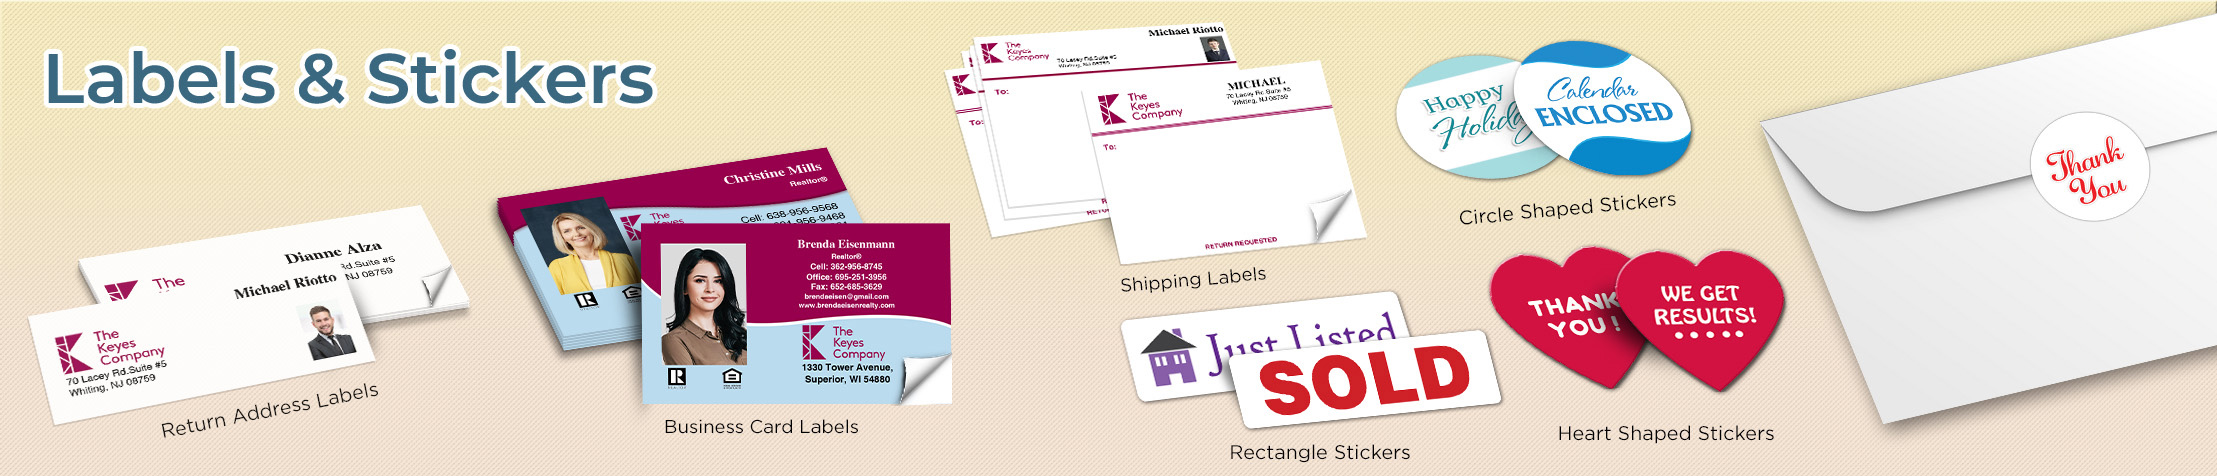 The Keyes Company Real Estate Labels and Stickers - The Keyes Company  business card labels, return address labels, shipping labels, and assorted stickers | BestPrintBuy.com